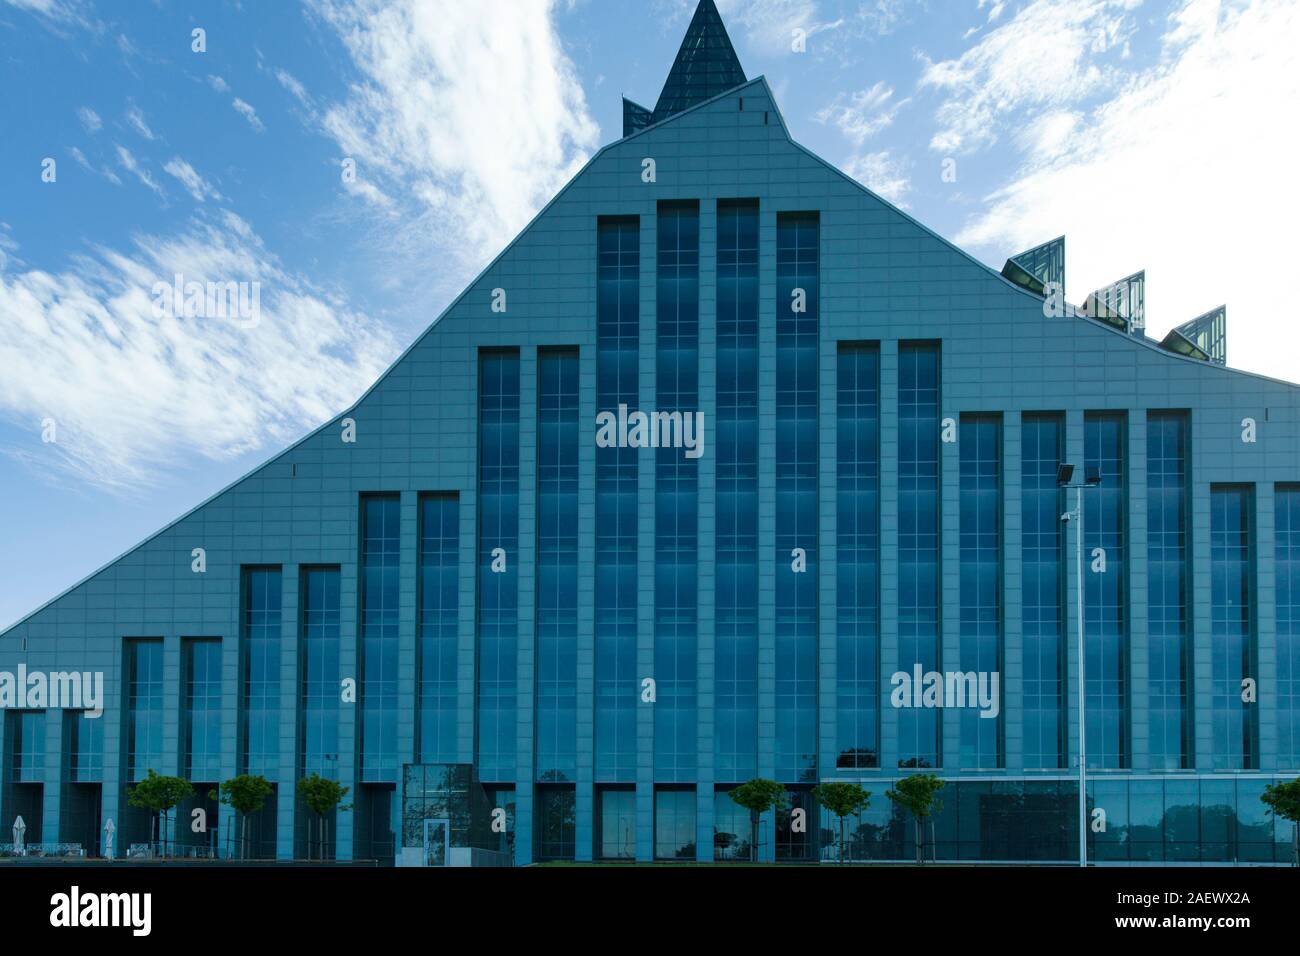 Facade of National library of Latvia with blue sky on the background Stock Photo